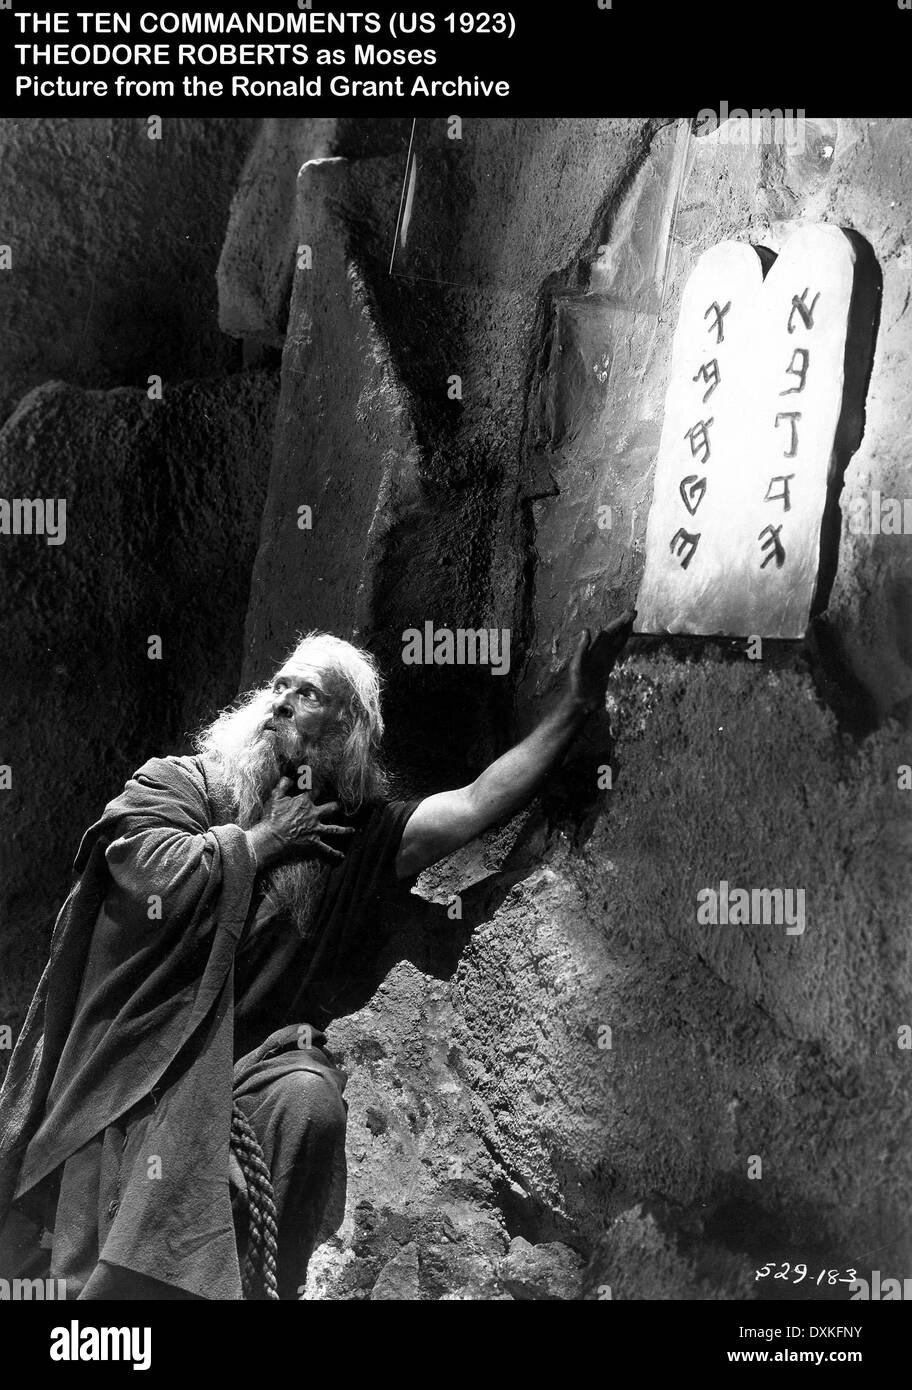 THE TEN COMMANDMENTS (US1923) THEODORE ROBERTS AS MOSES Stock Photo